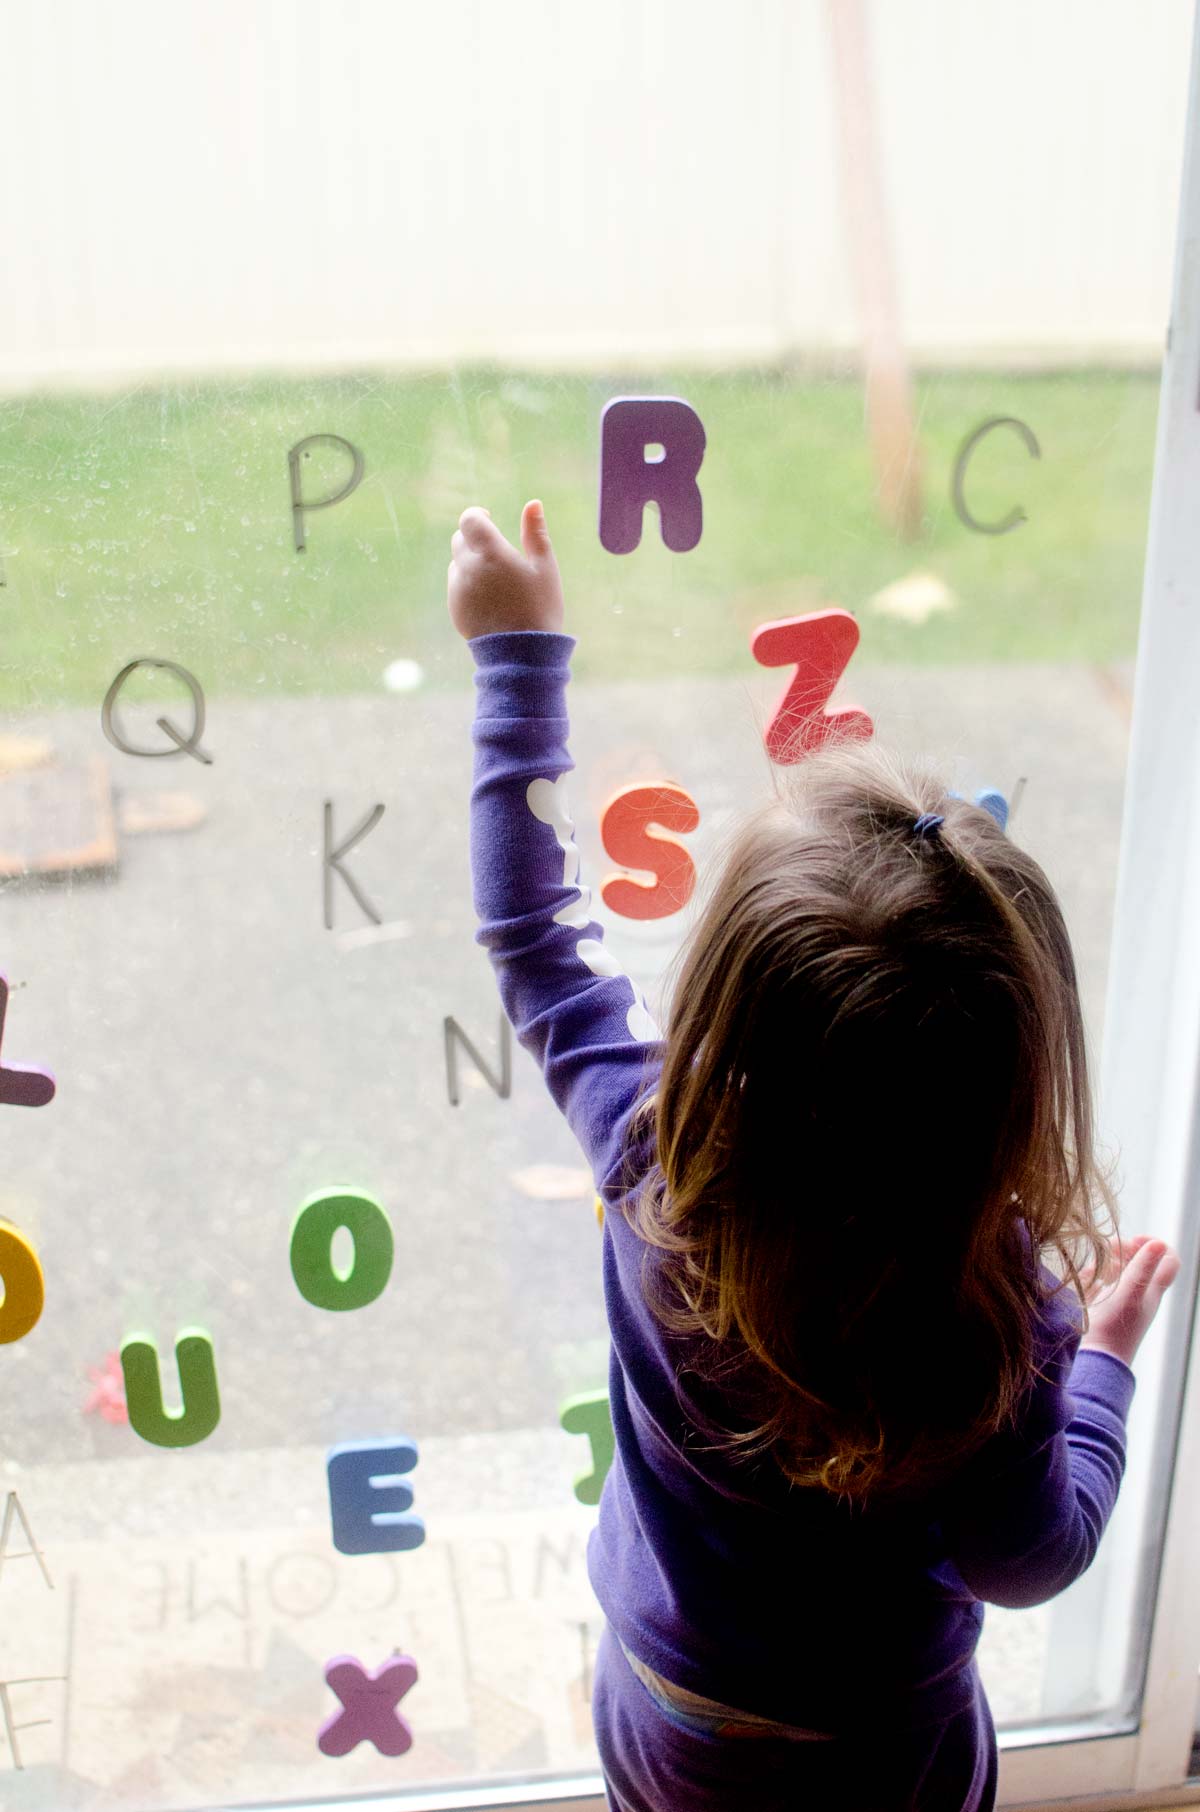 A child reaches for a purple letter R stuck to a window. There are dry erase marker letters on the glass and other foam letters stuck to it.